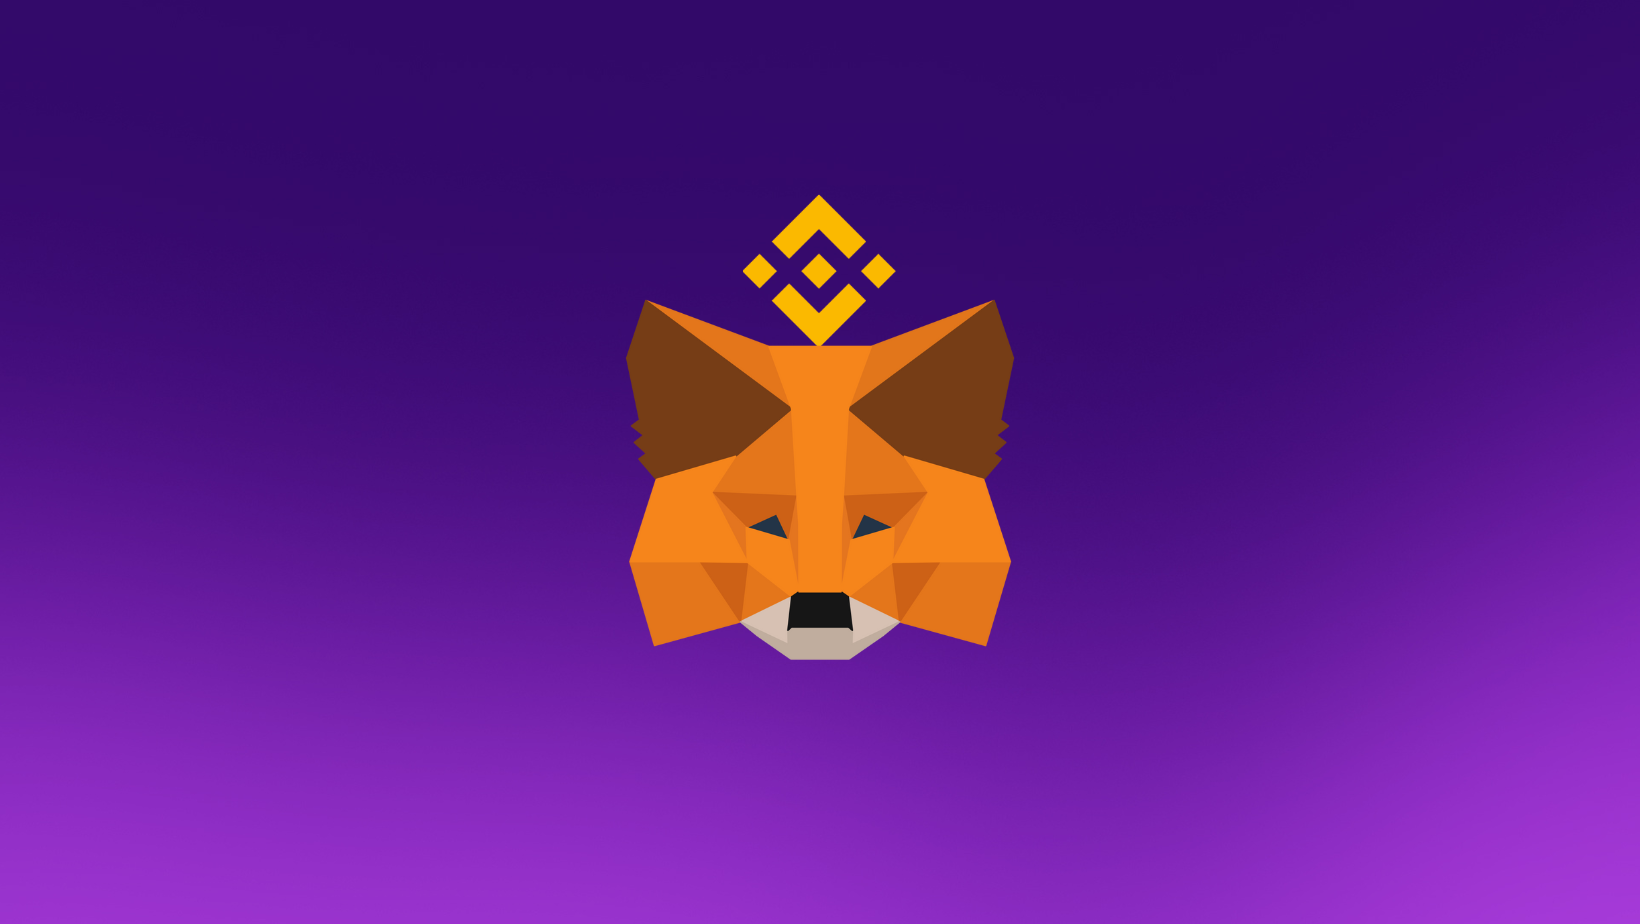 How to Add Binance Smart Chain (BSC) to MetaMask Wallet